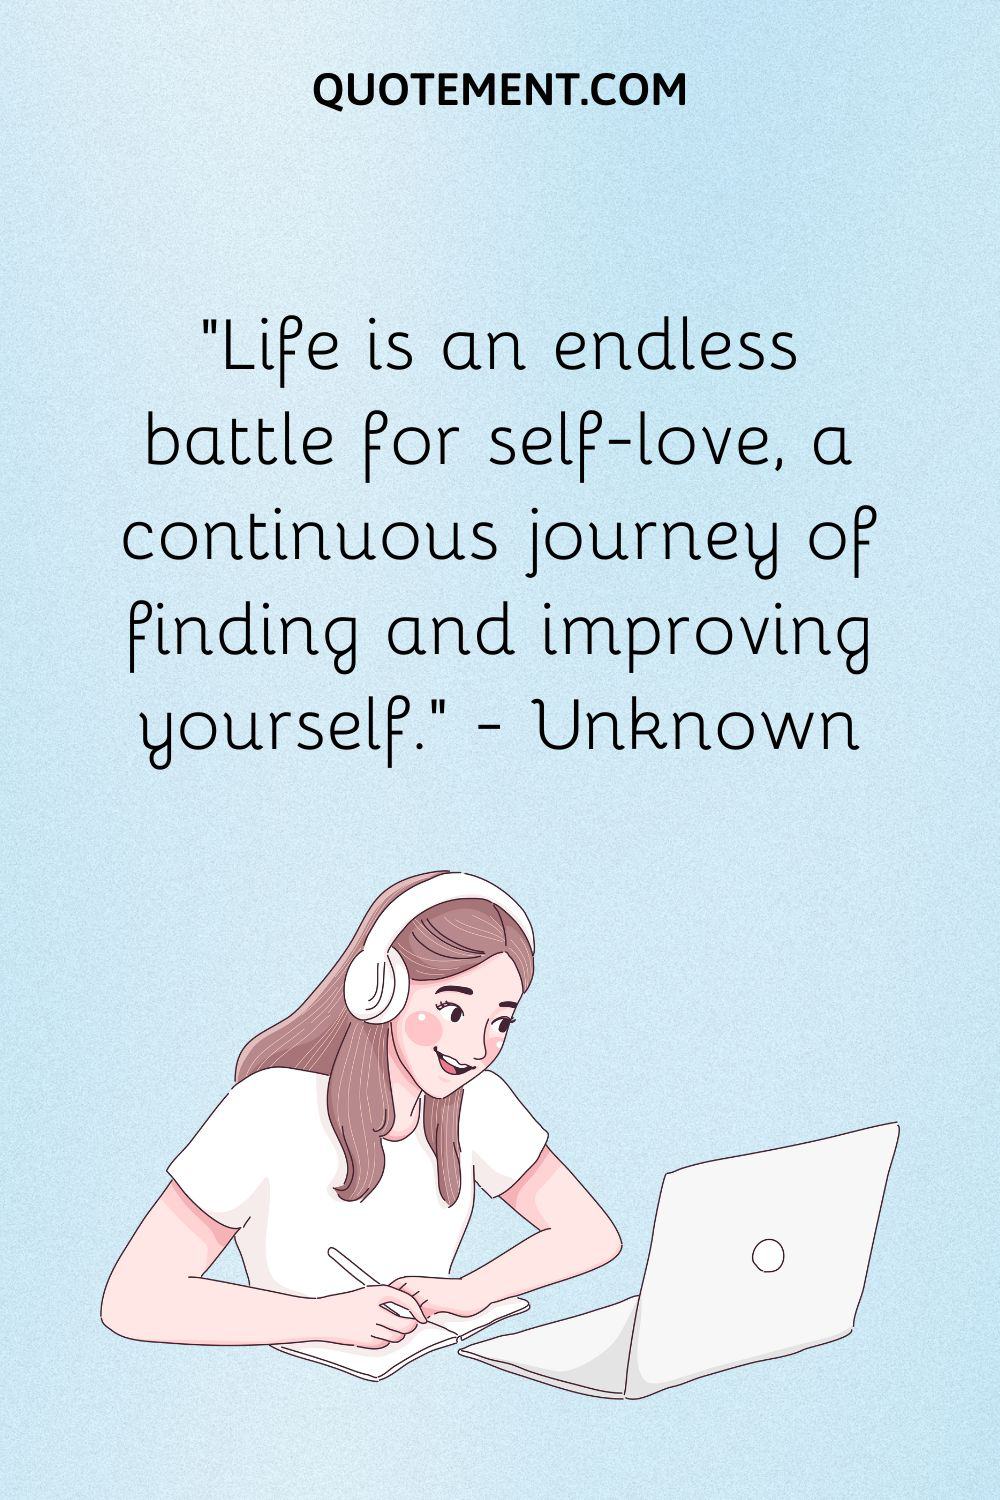 Life is an endless battle for self-love, a continuous journey of finding and improving yourself